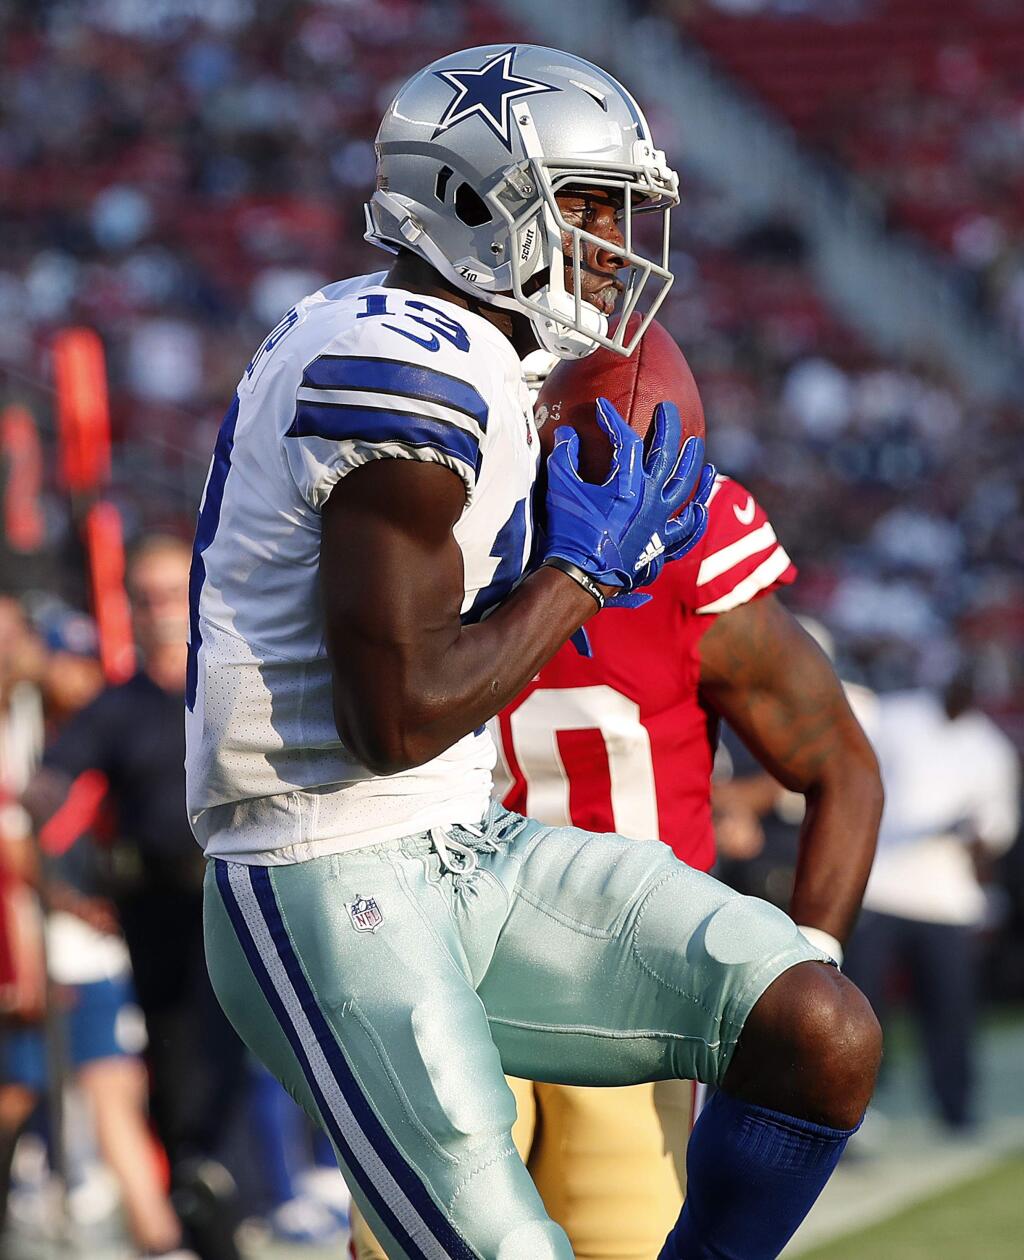 Dallas Cowboys wide receiver Michael Gallup, foreground, catches a touchdown pass in front of San Francisco 49ers defensive back Jimmie Ward during the first half of an NFL preseason football game in Santa Clara, Calif., Thursday, Aug. 9, 2018. (AP Photo/Tony Avelar)